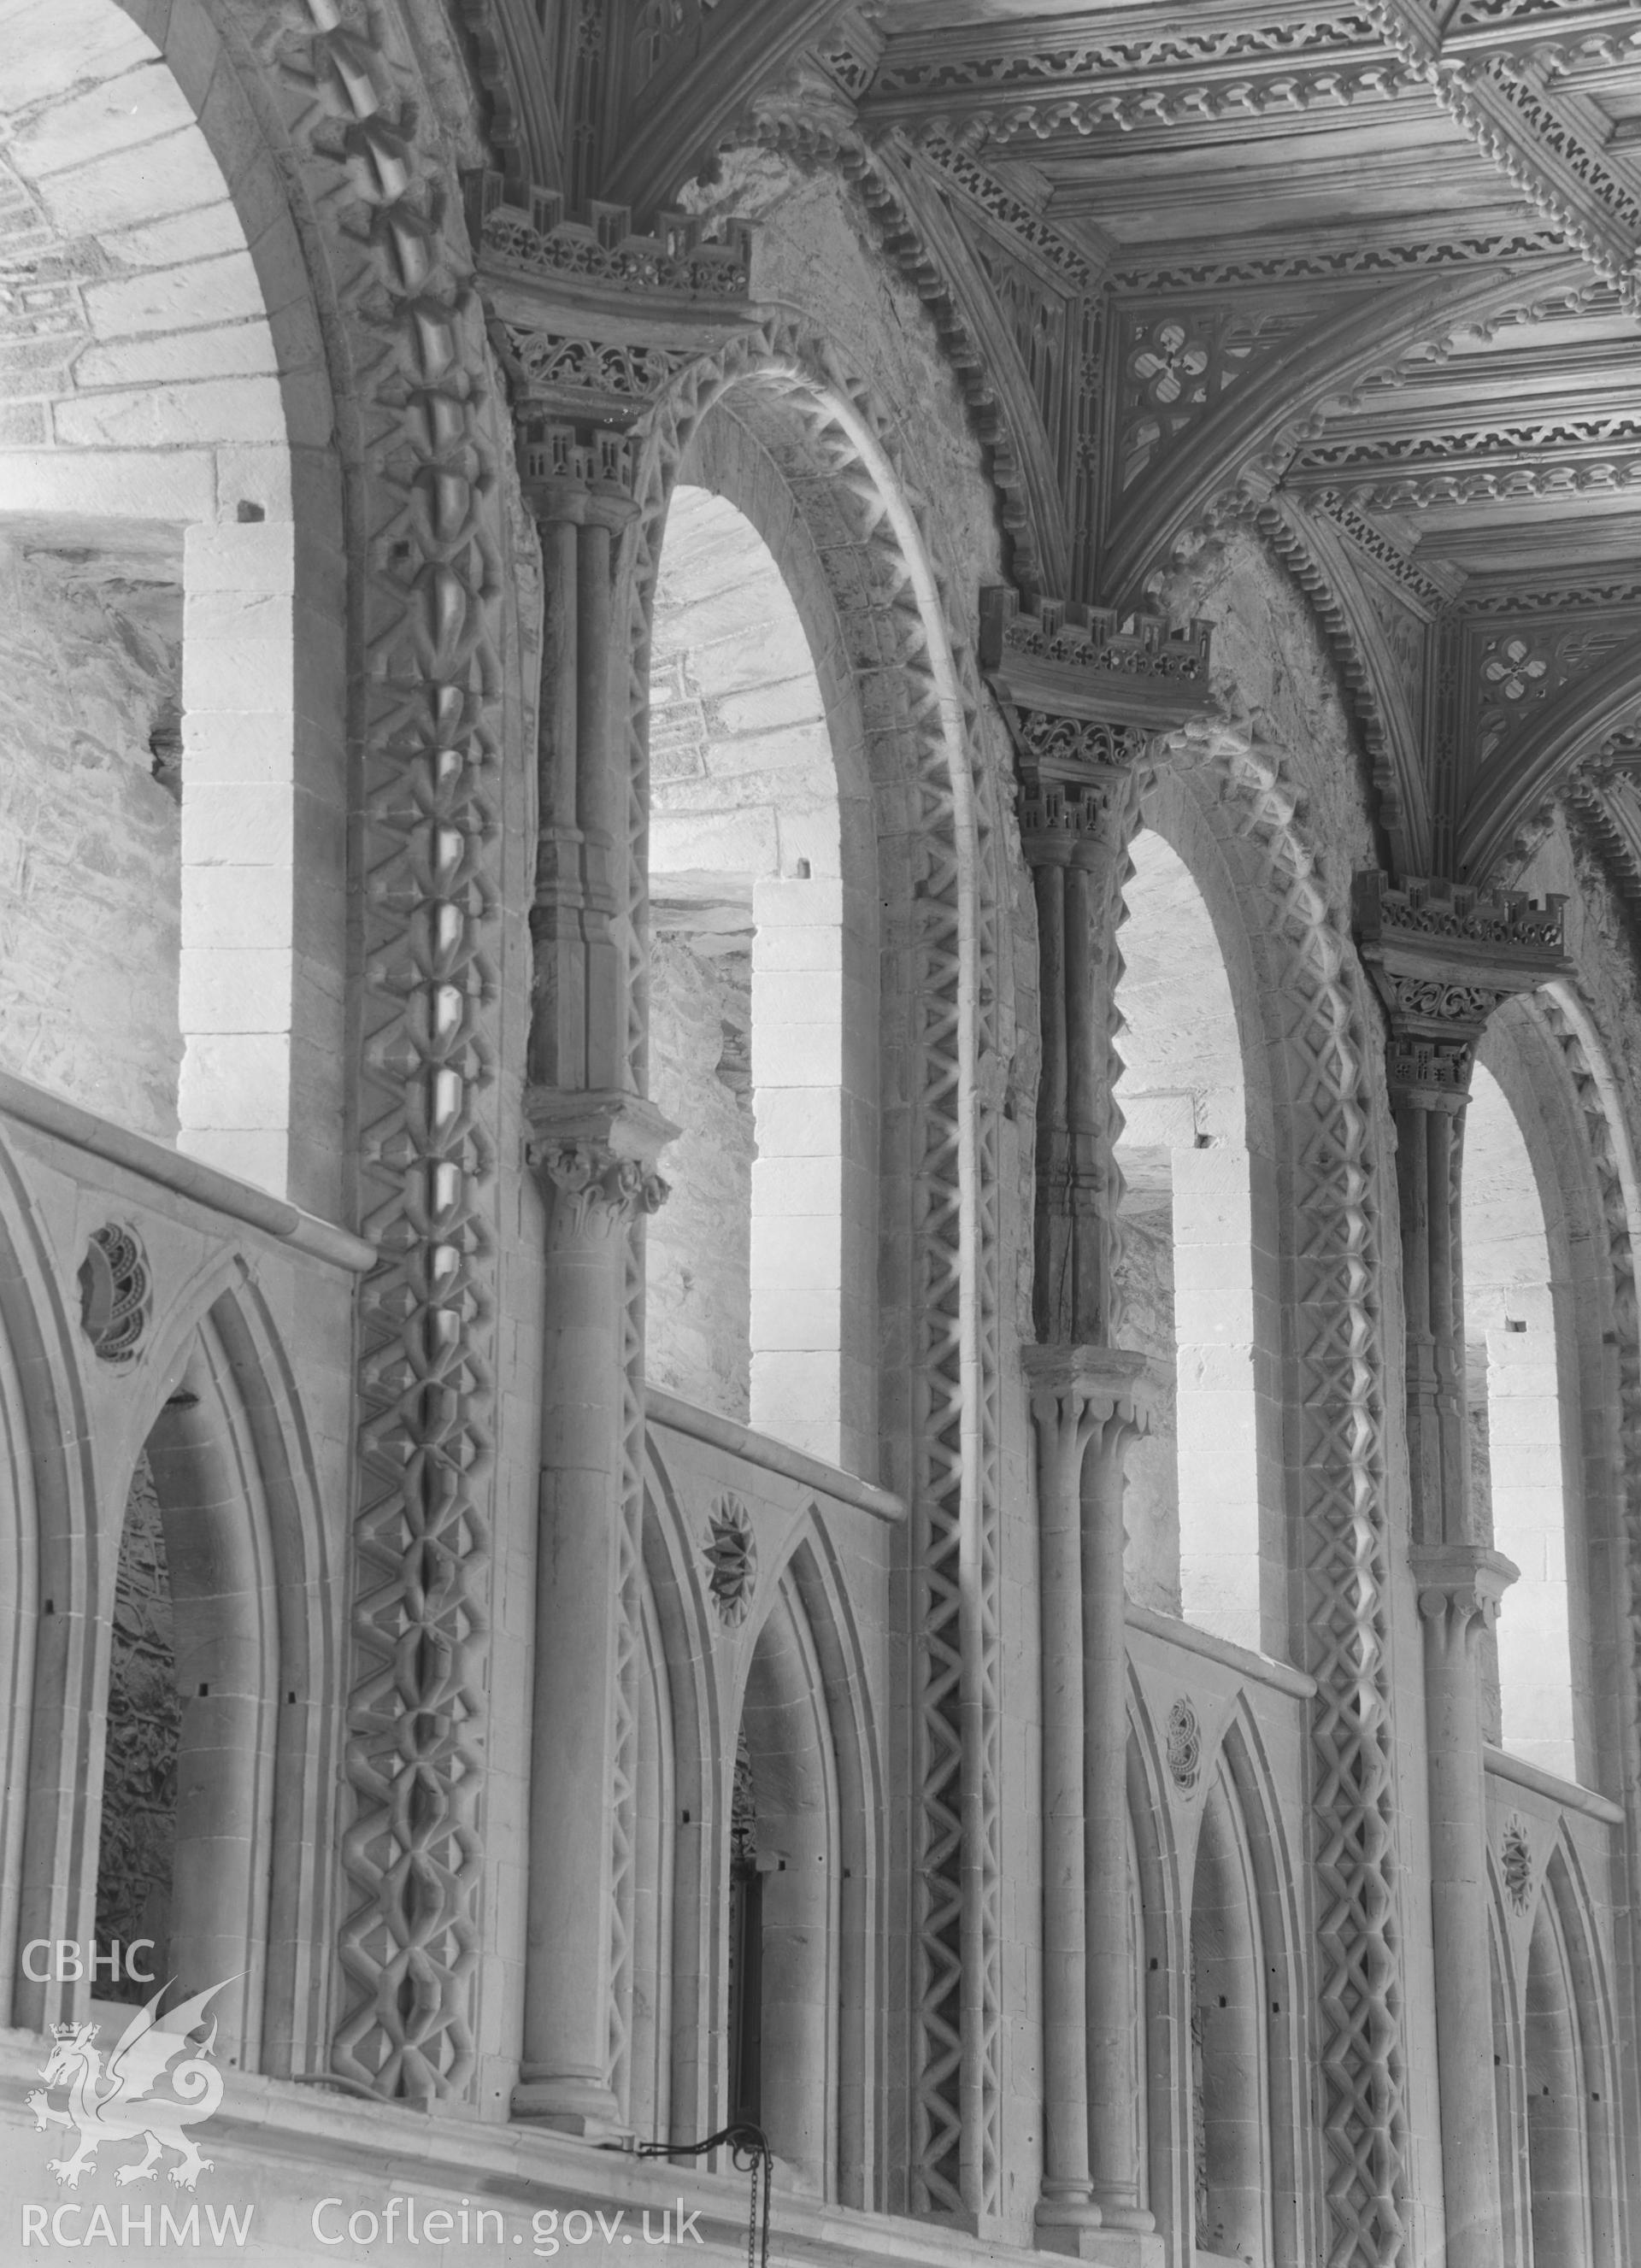 Digital copy of a black and white nitrate negative showing decorated window arches at St David's Cathedral, taken by E.W. Lovegrove, July 1936.